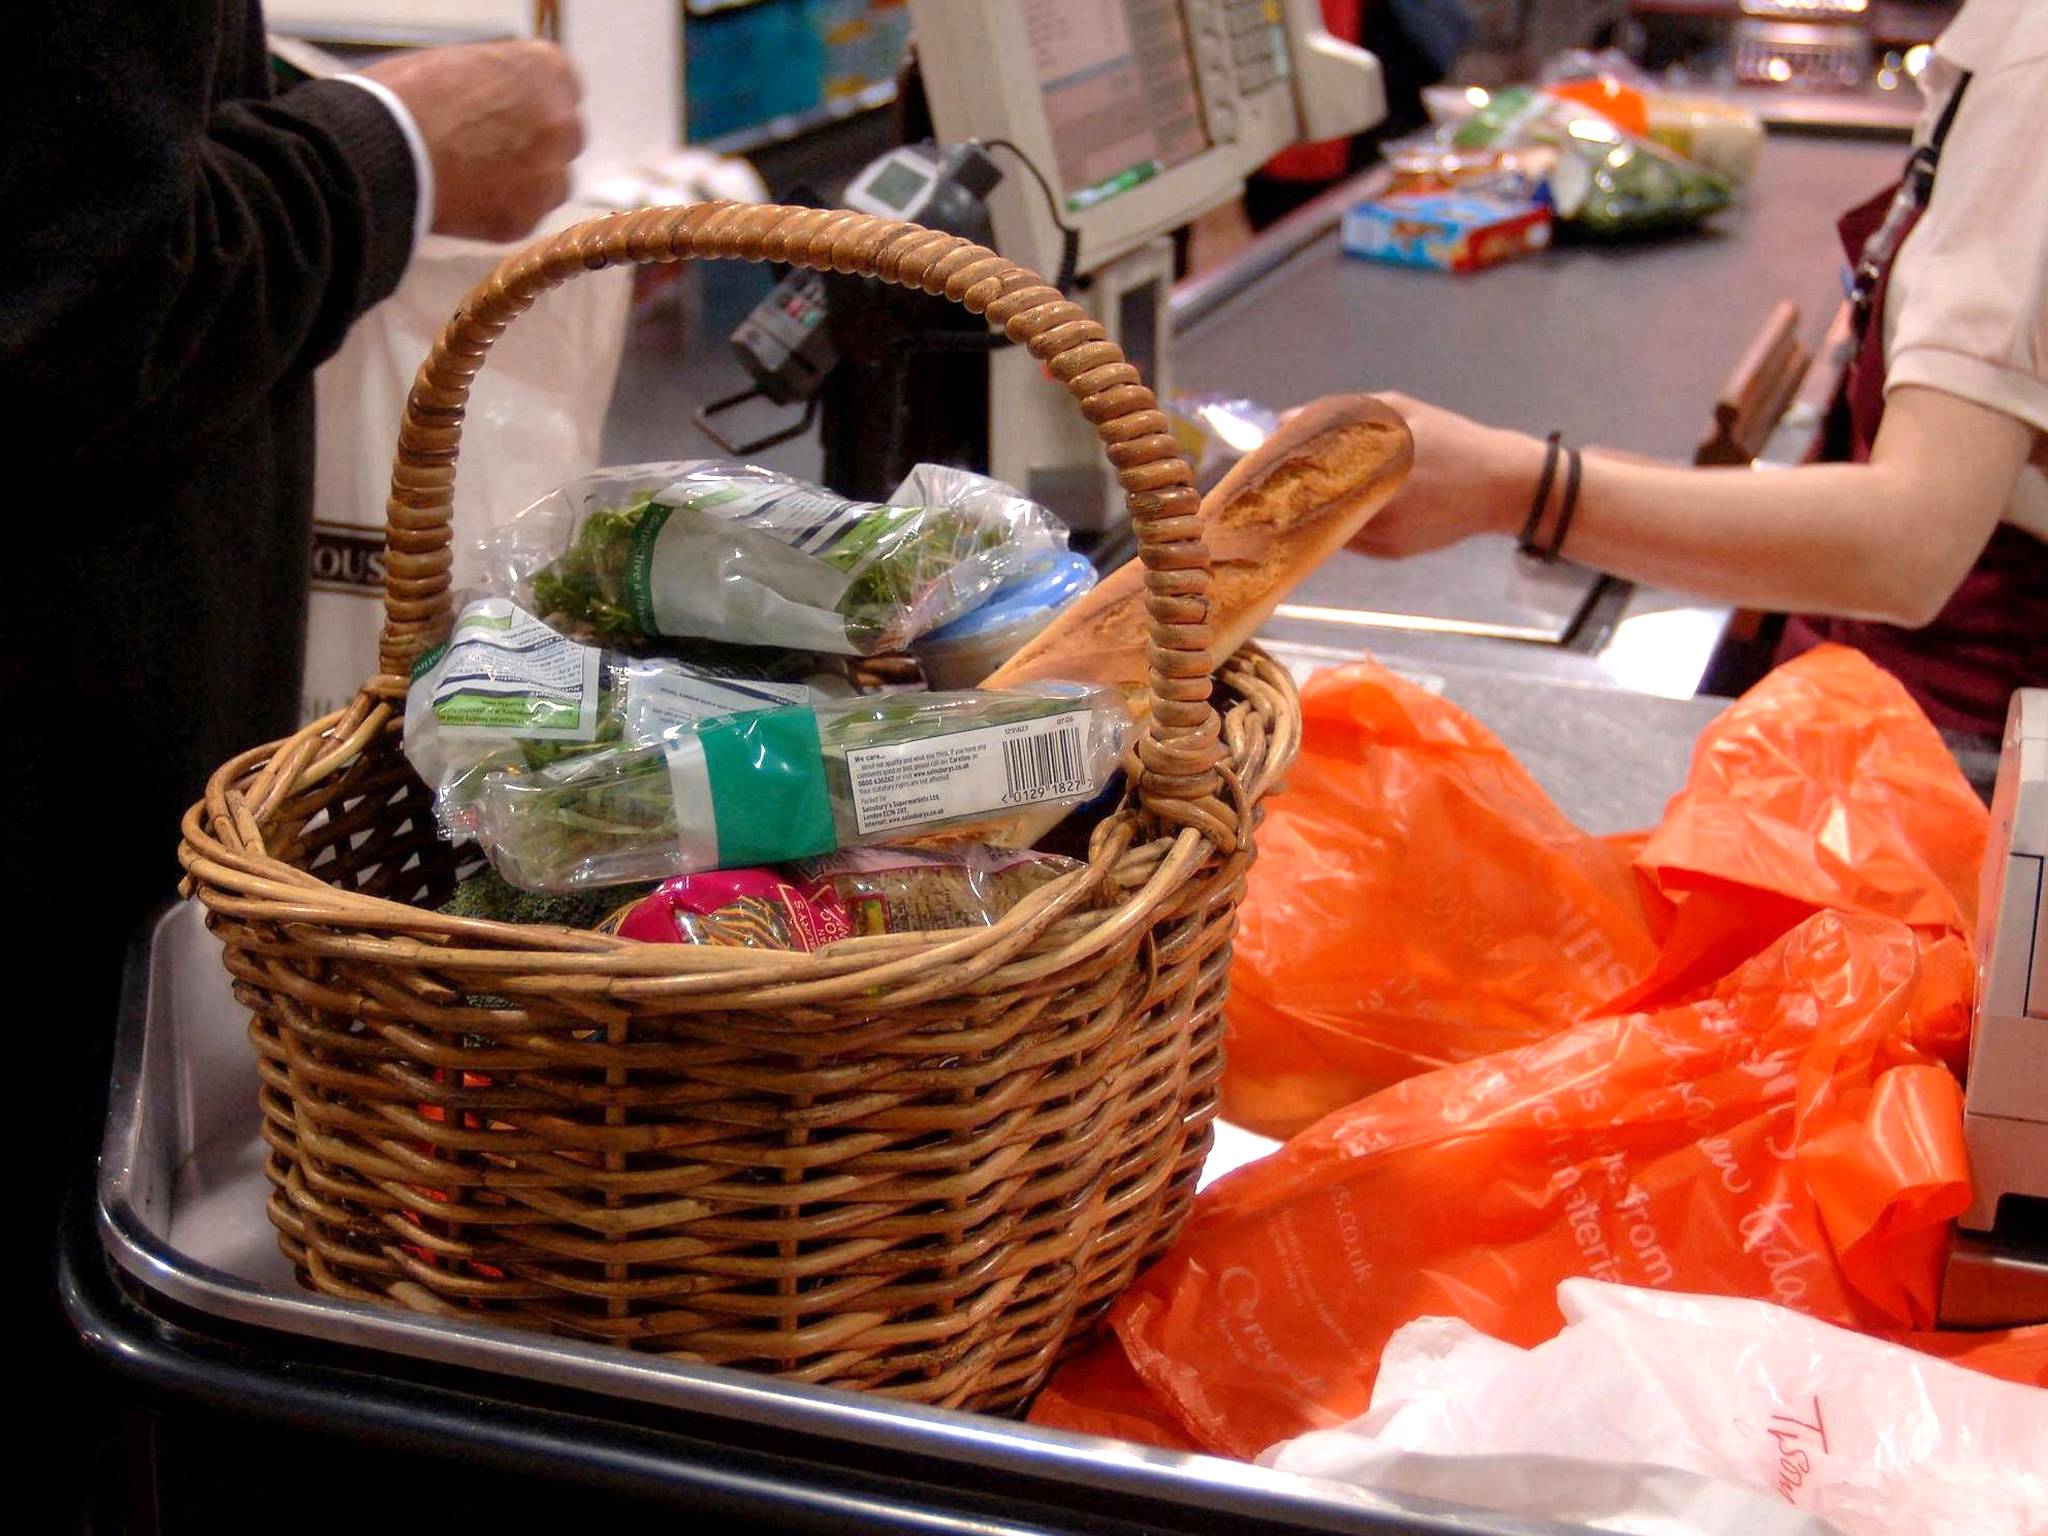 The biggest contribution to the fall in the inflation rate came from a decline in the price of groceries